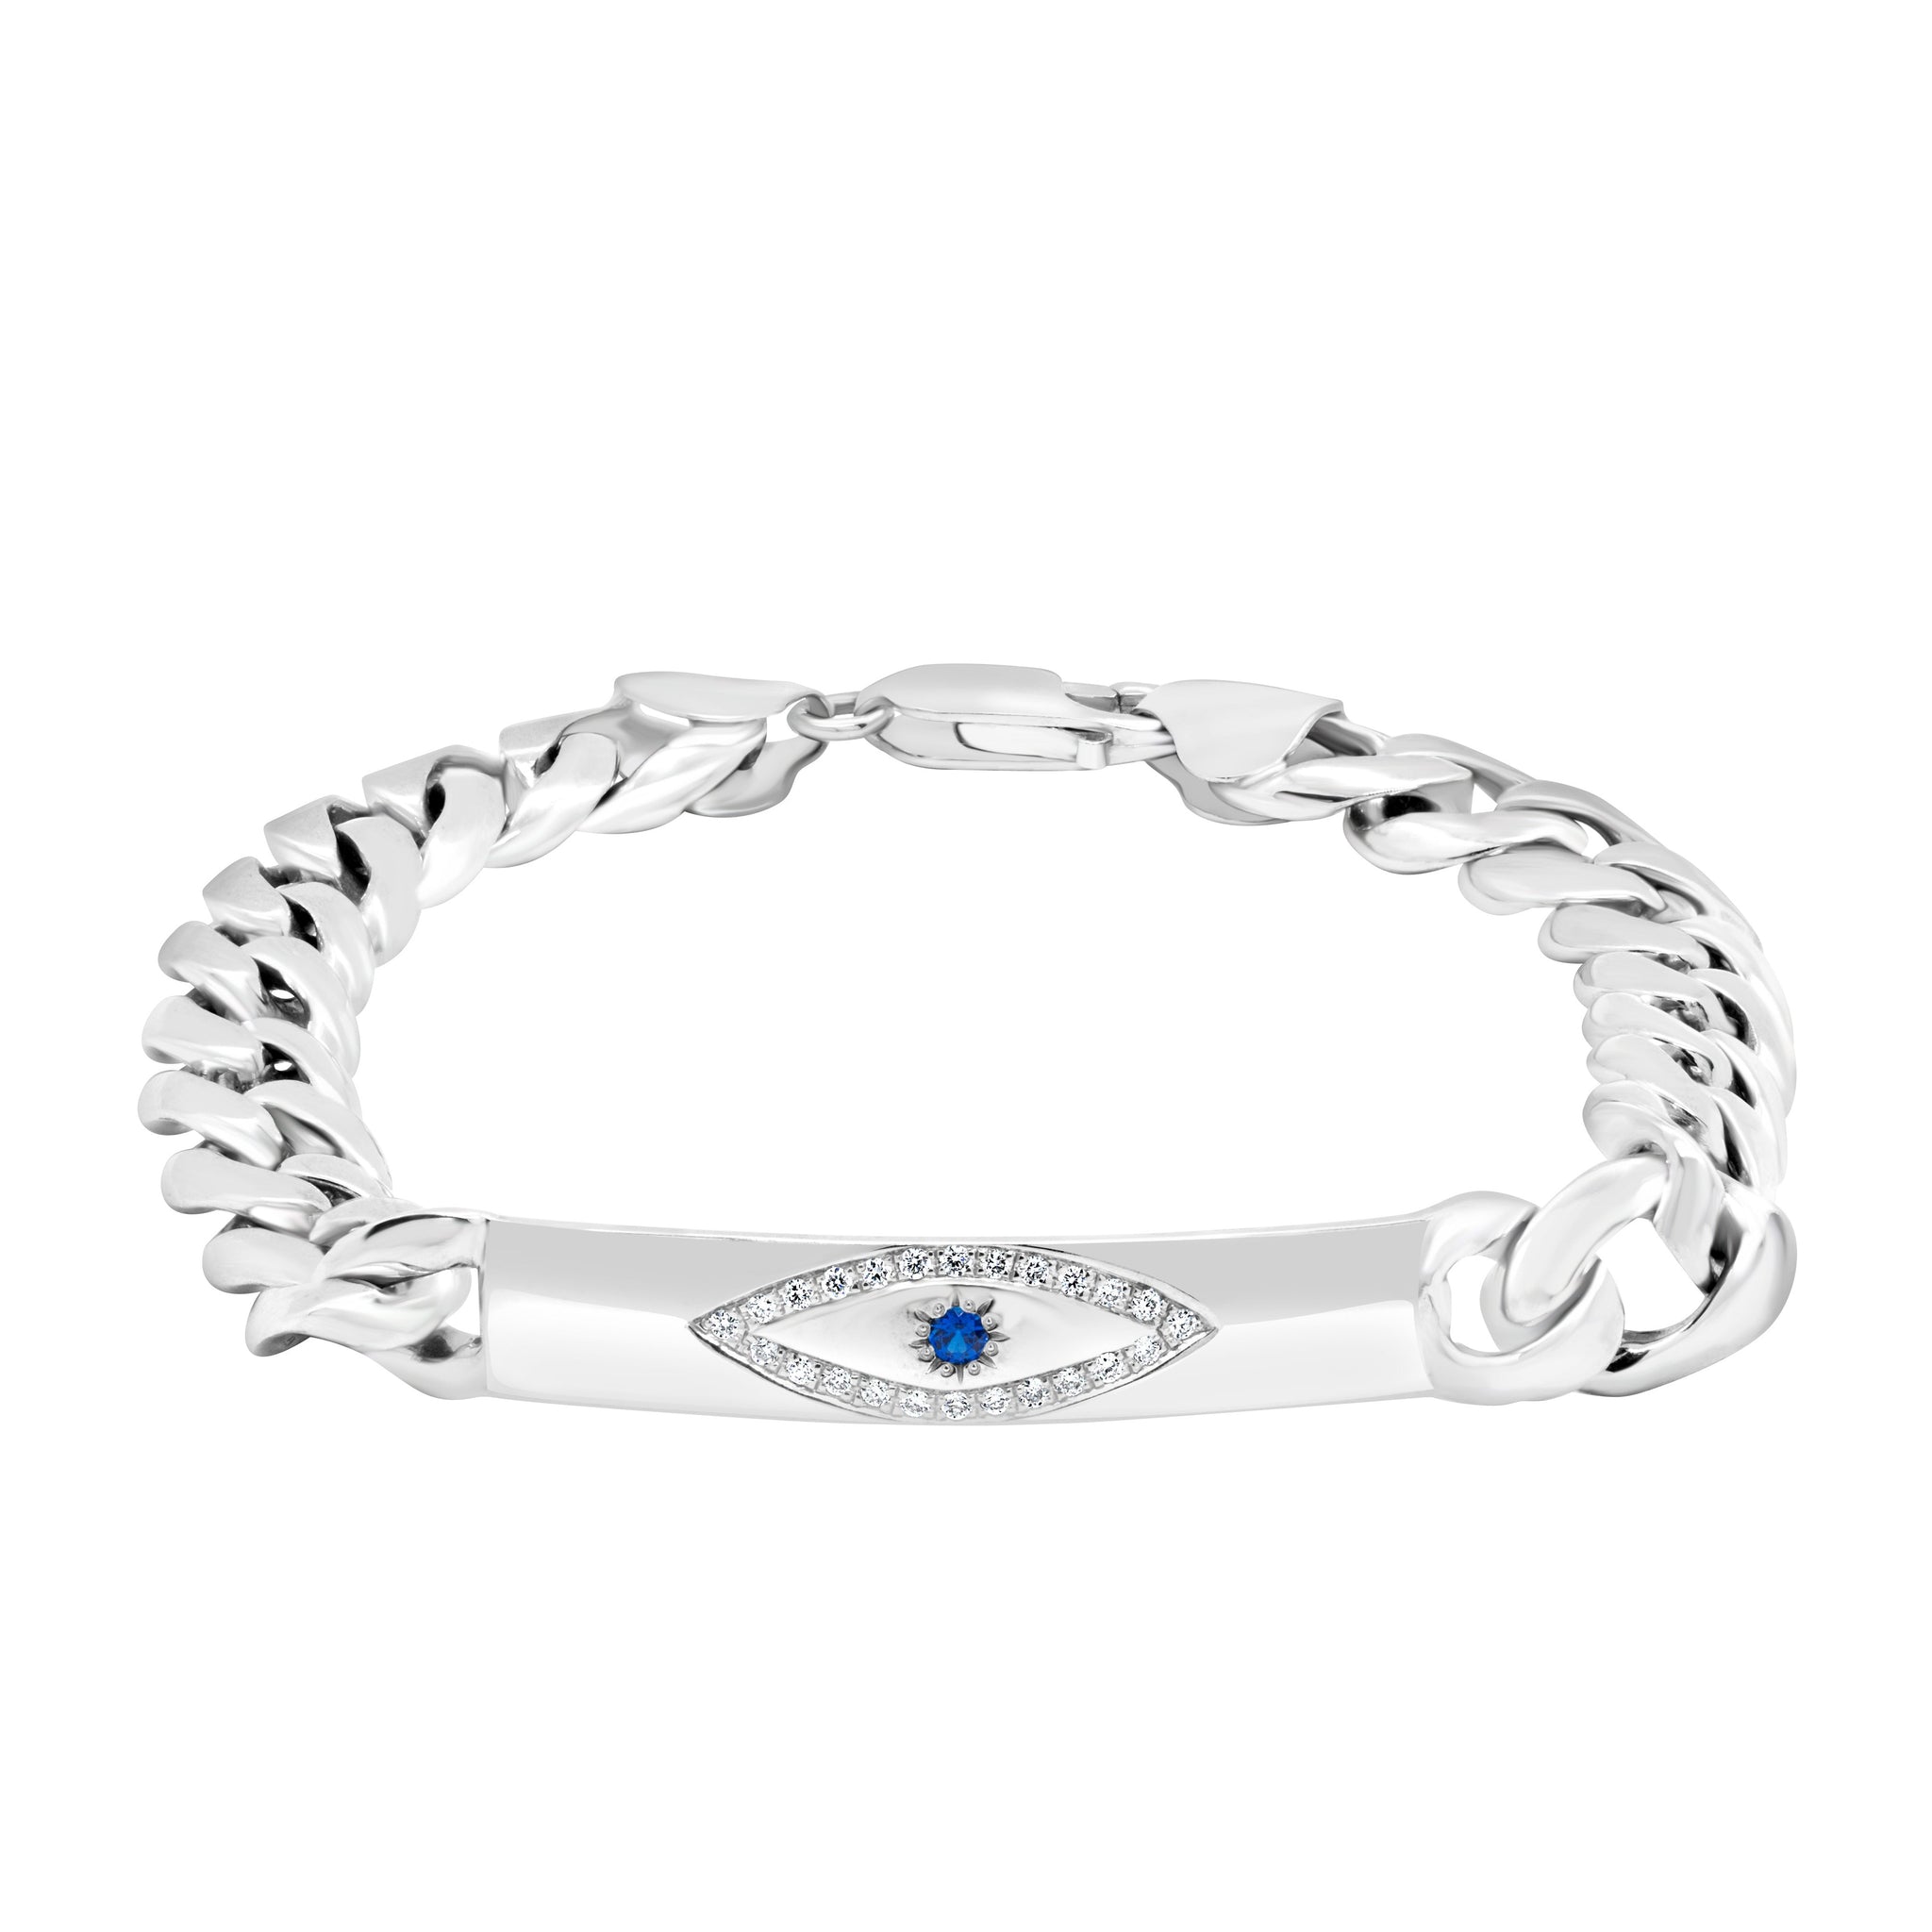 10k White Gold Bracelet Adorned with Diamonds and Sapphires